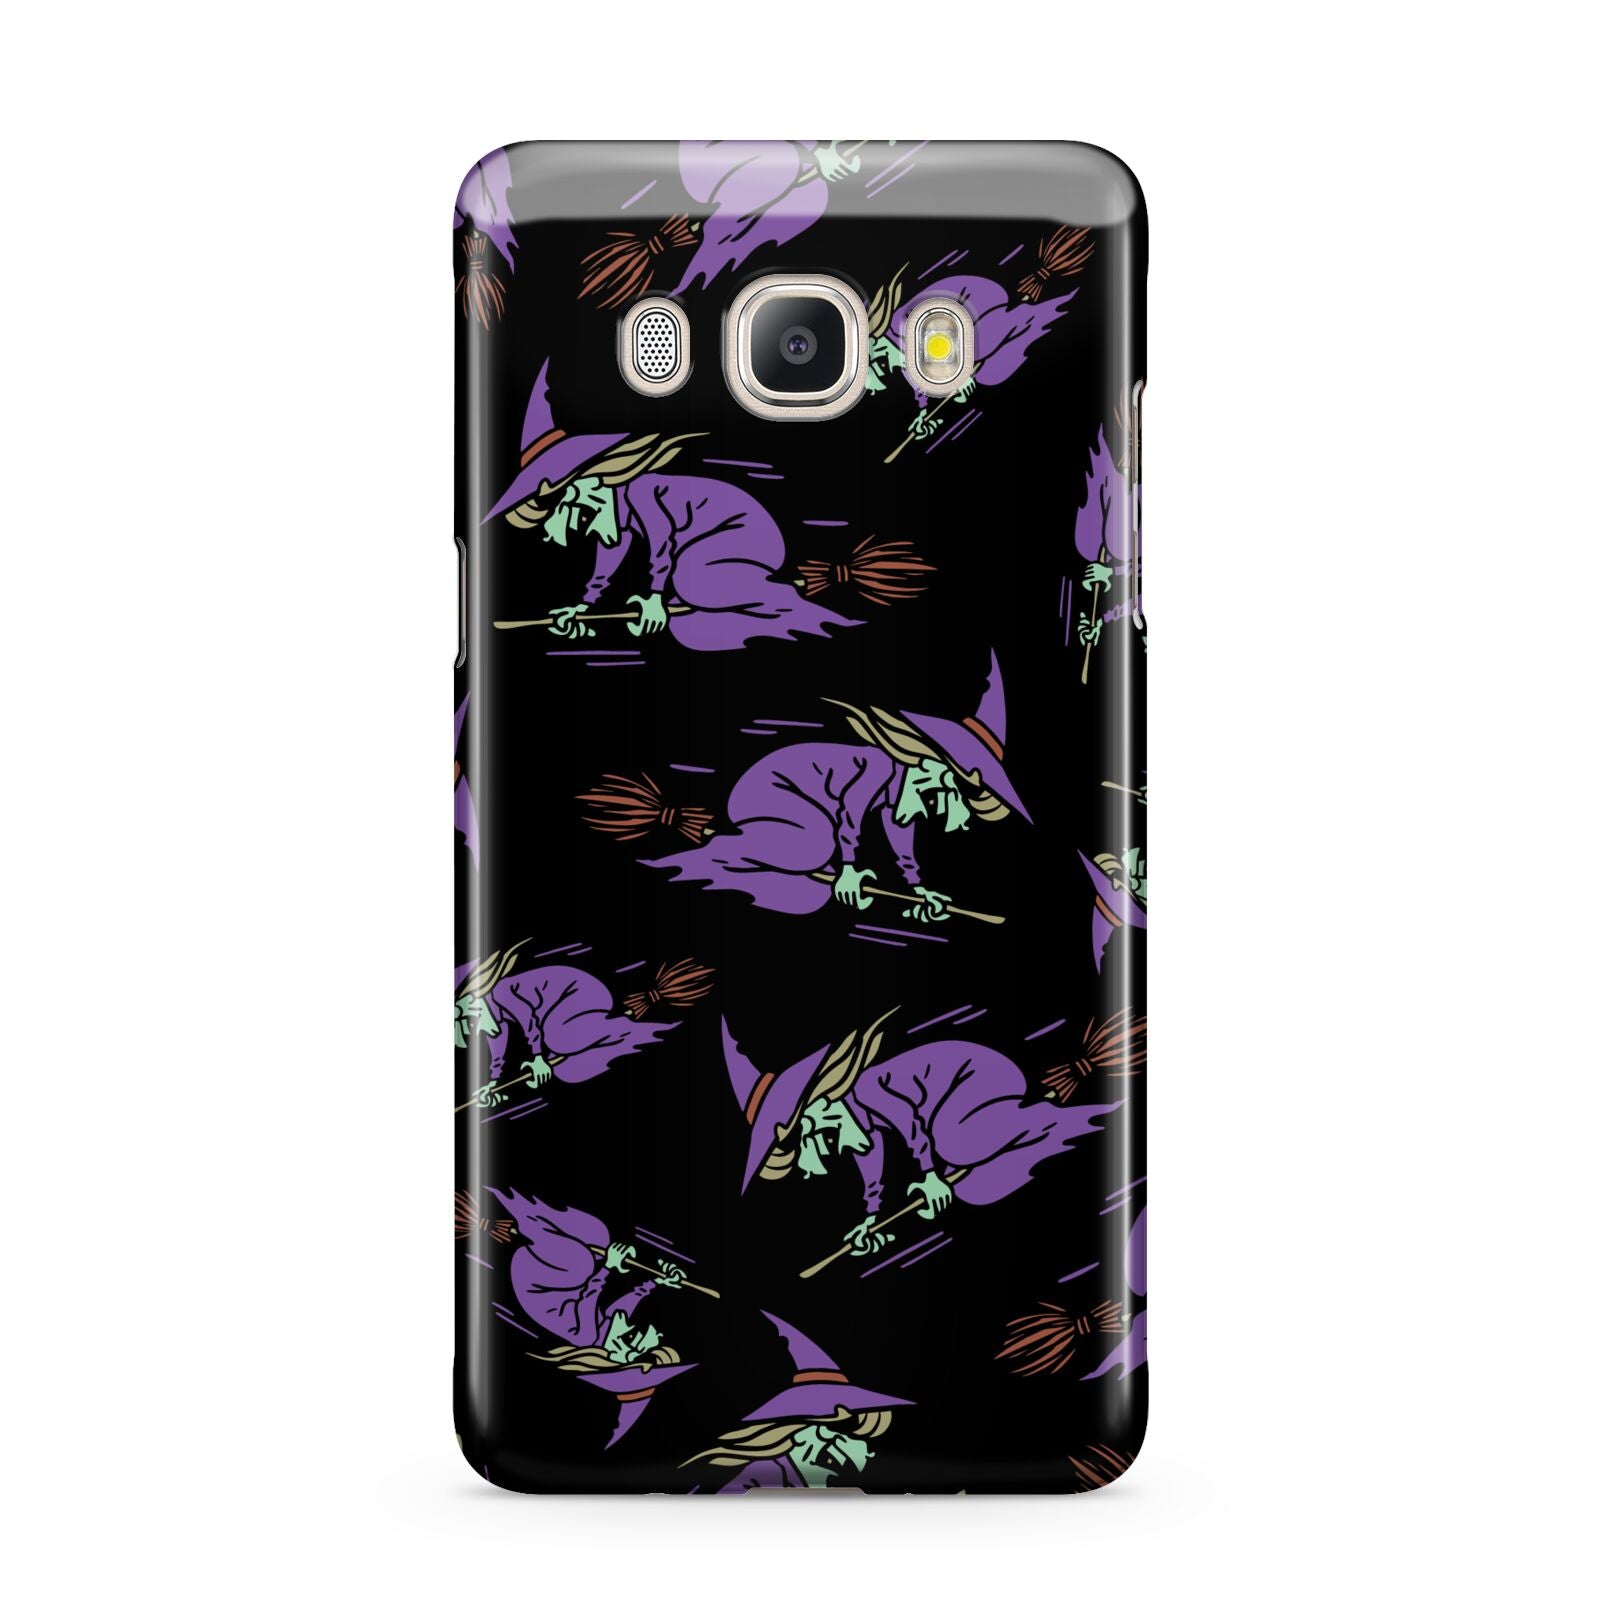 Flying Witches Samsung Galaxy J5 2016 Case